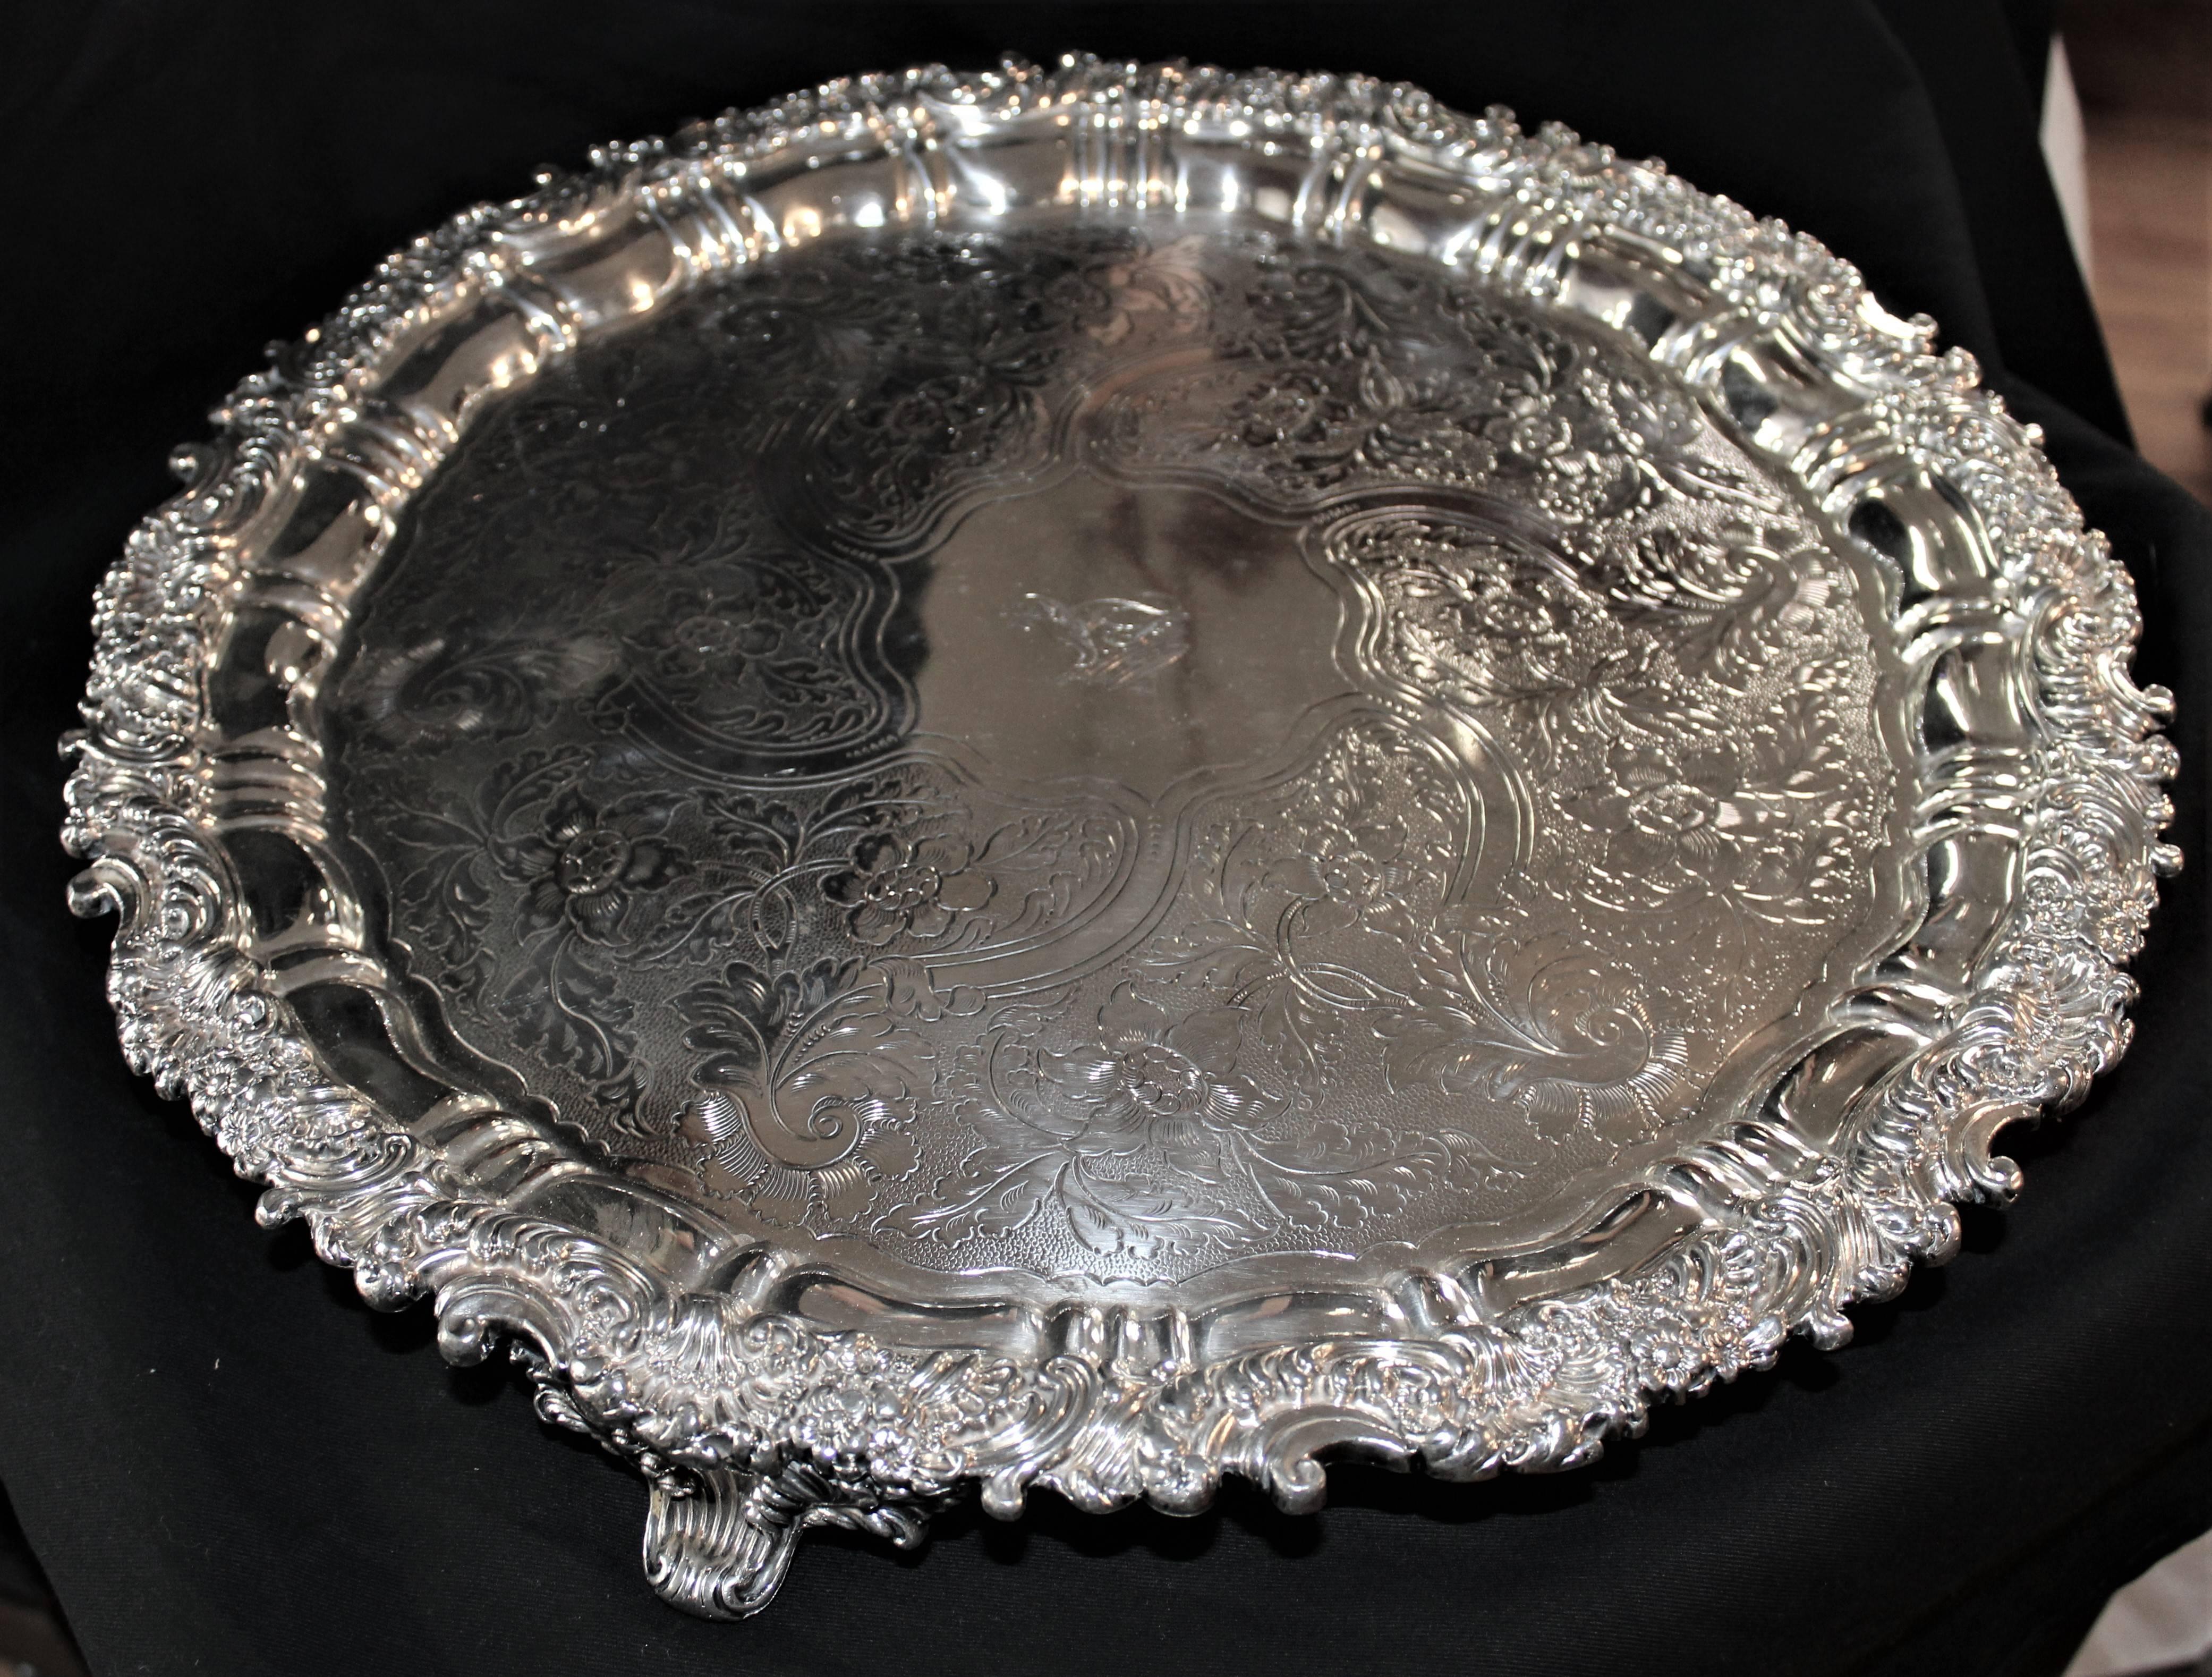 Large 18 inch oval Sheffield English footed silver over copper plated crested salver, circa 1810 with a cast edge.